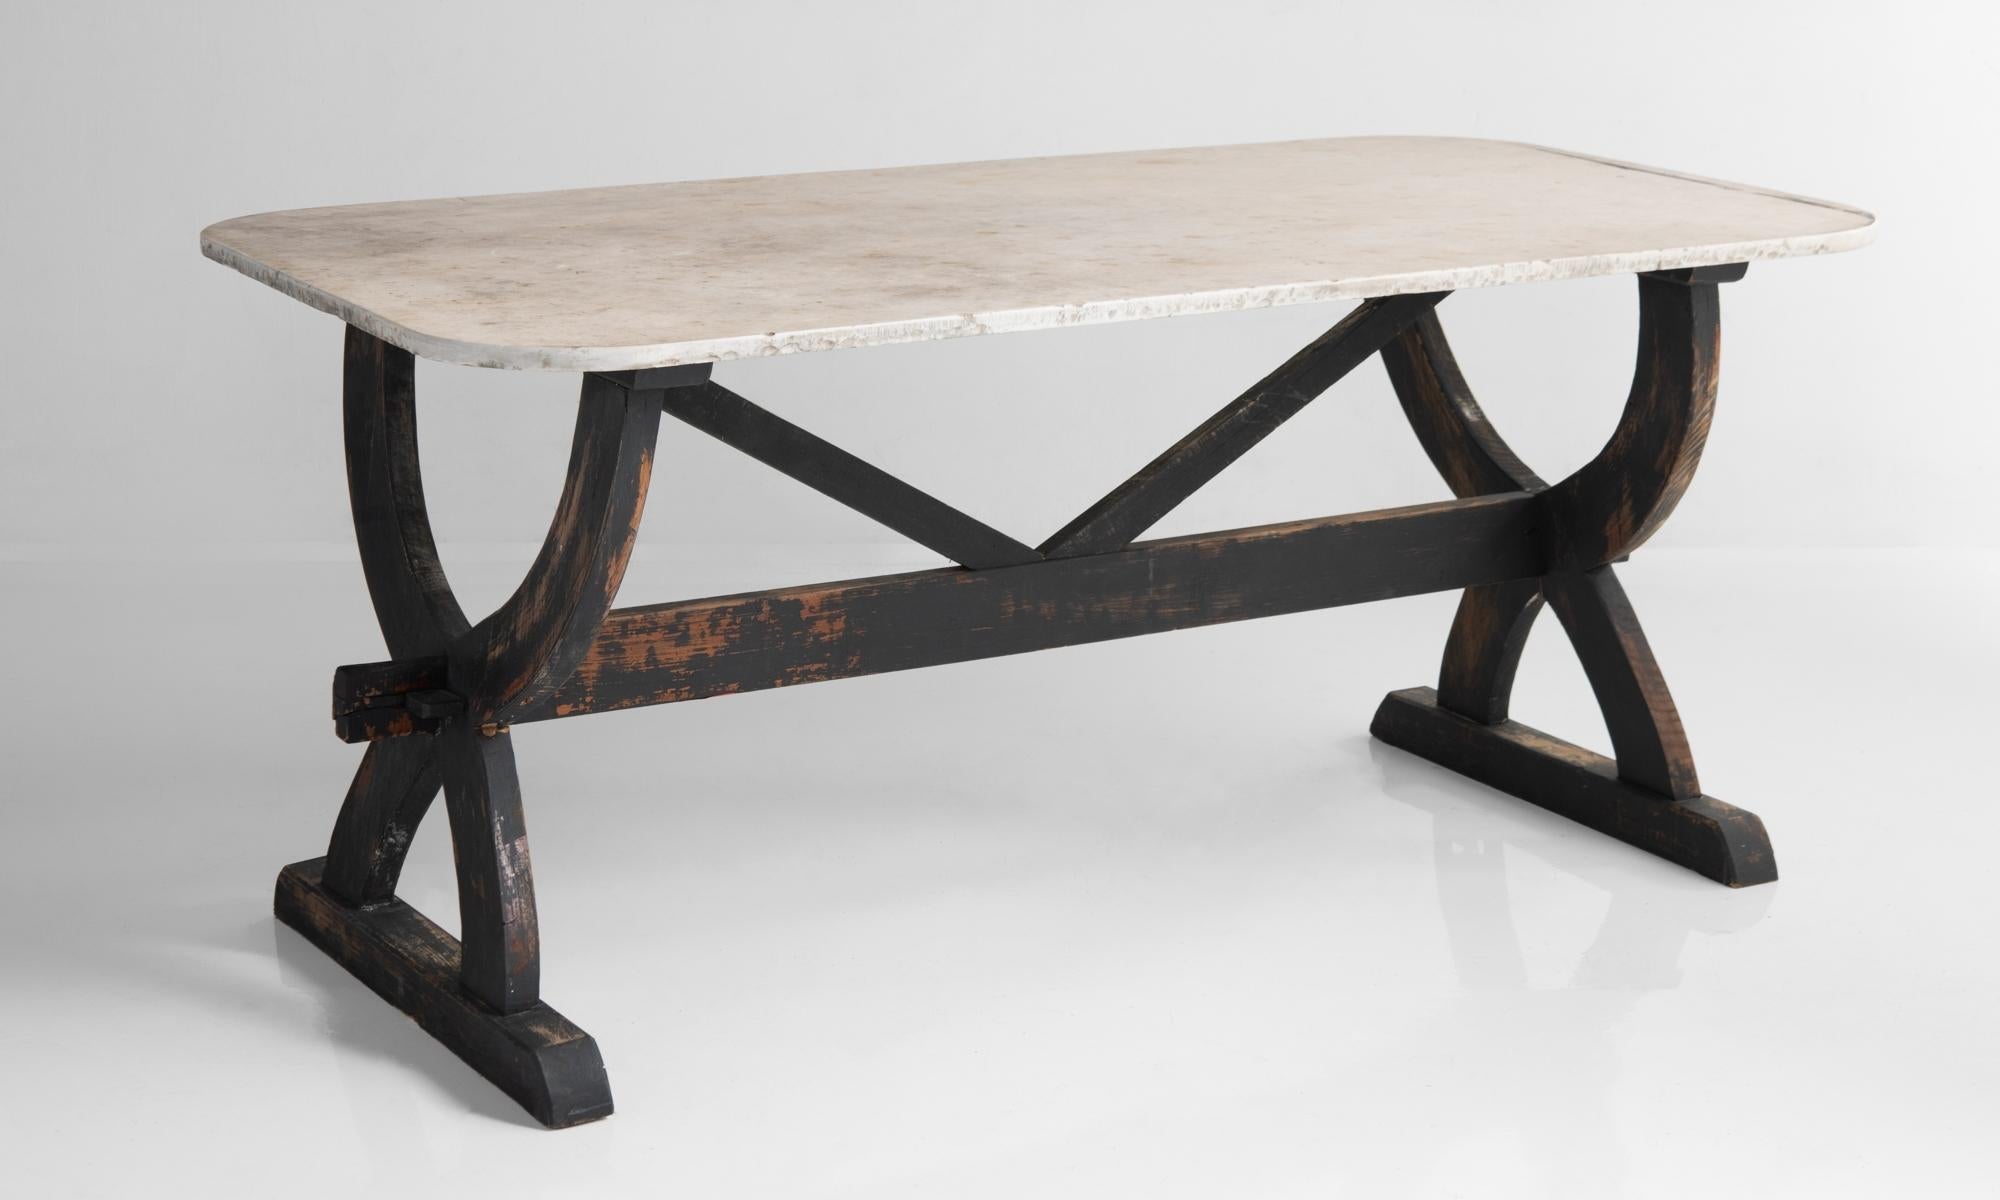 Marble top dining table, France 19th century.

Indoor/outdoor mid-size dining table with curved marble top and painted wooden base.